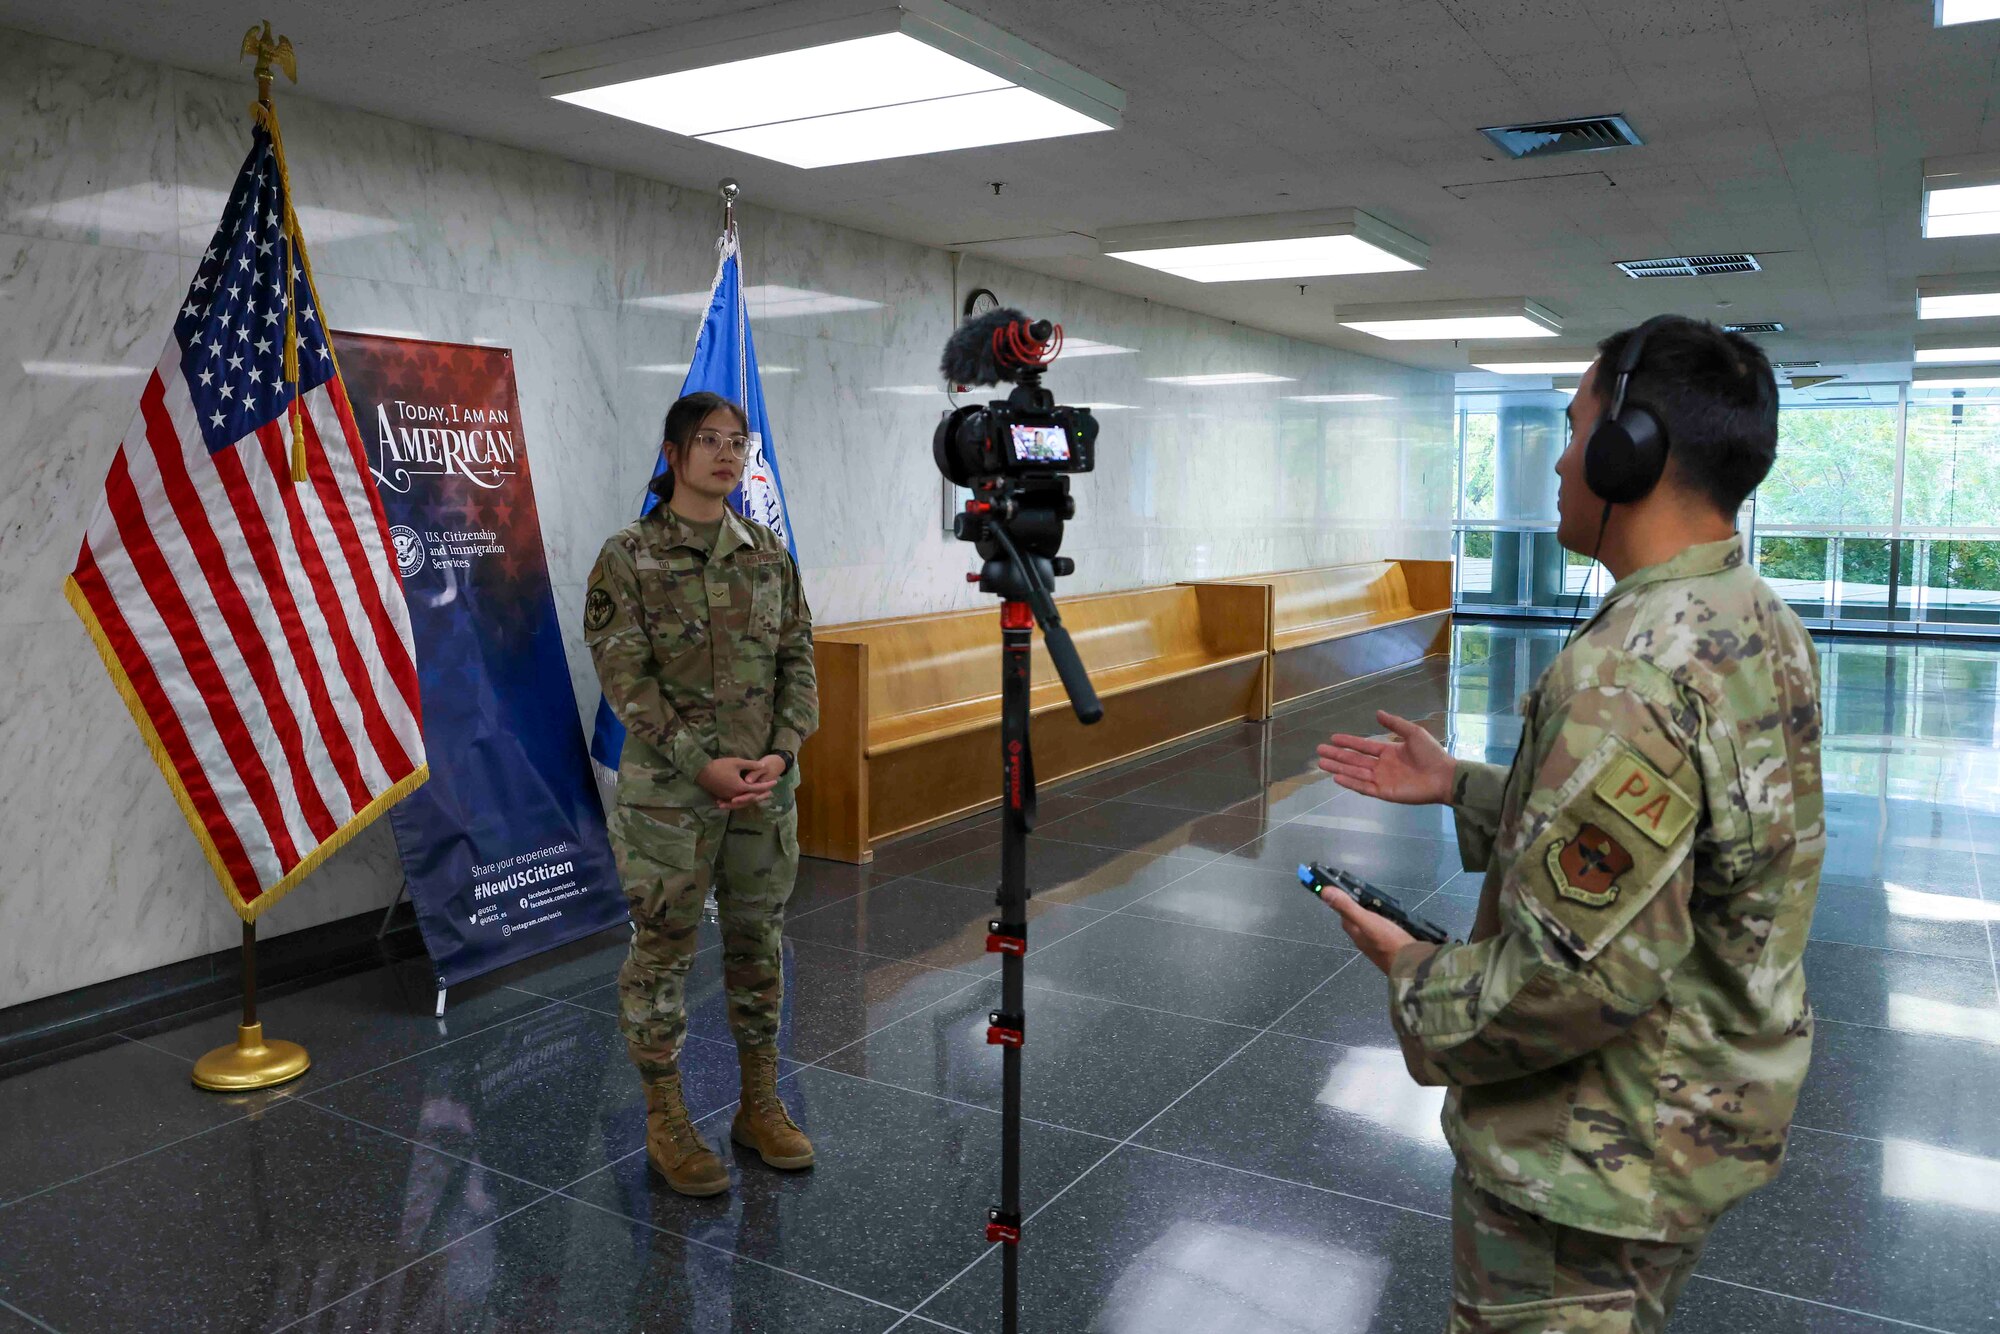 U.S. Air Force Airman 1st Class Trieu Do, 9th Force Support Squadron food service specialist, is interviewed by U.S. Air Force Staff Sgt. Ramon Adelan, 364th Recruiting Squadron public affairs specialist, after conducting her nationalization ceremony to become a U.S. citizen at the United States Citizenship and Immigration Services field office in Sacramento, California, Nov. 15, 2023.